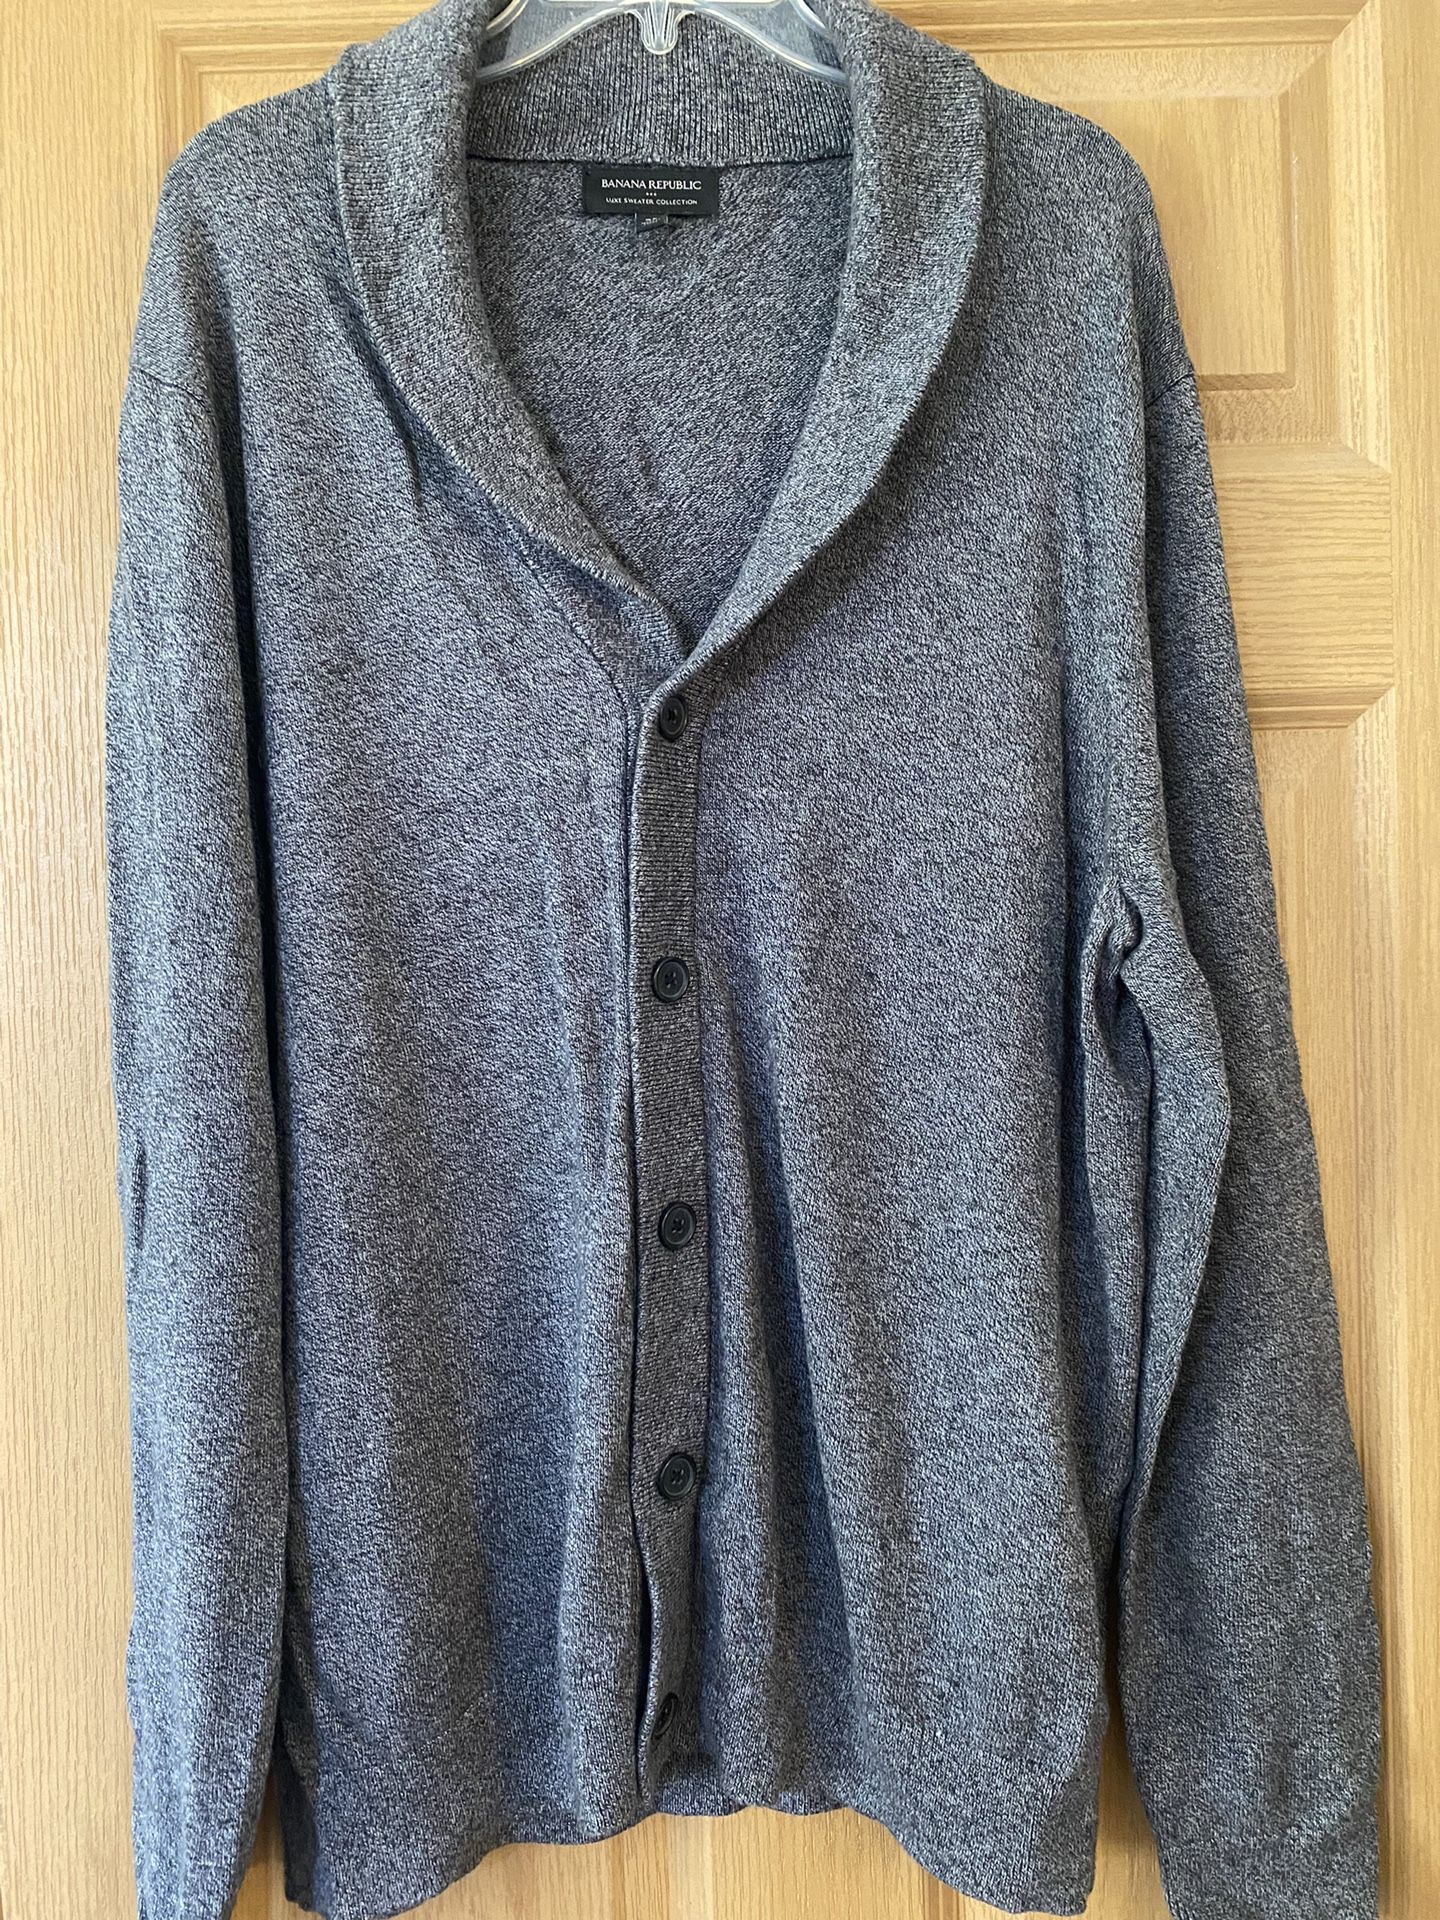 BANANA REPUBLIC LUXE SWEATER COLLECTION Dark Gray Cardigan Sweater Men's Size XL No Pockets